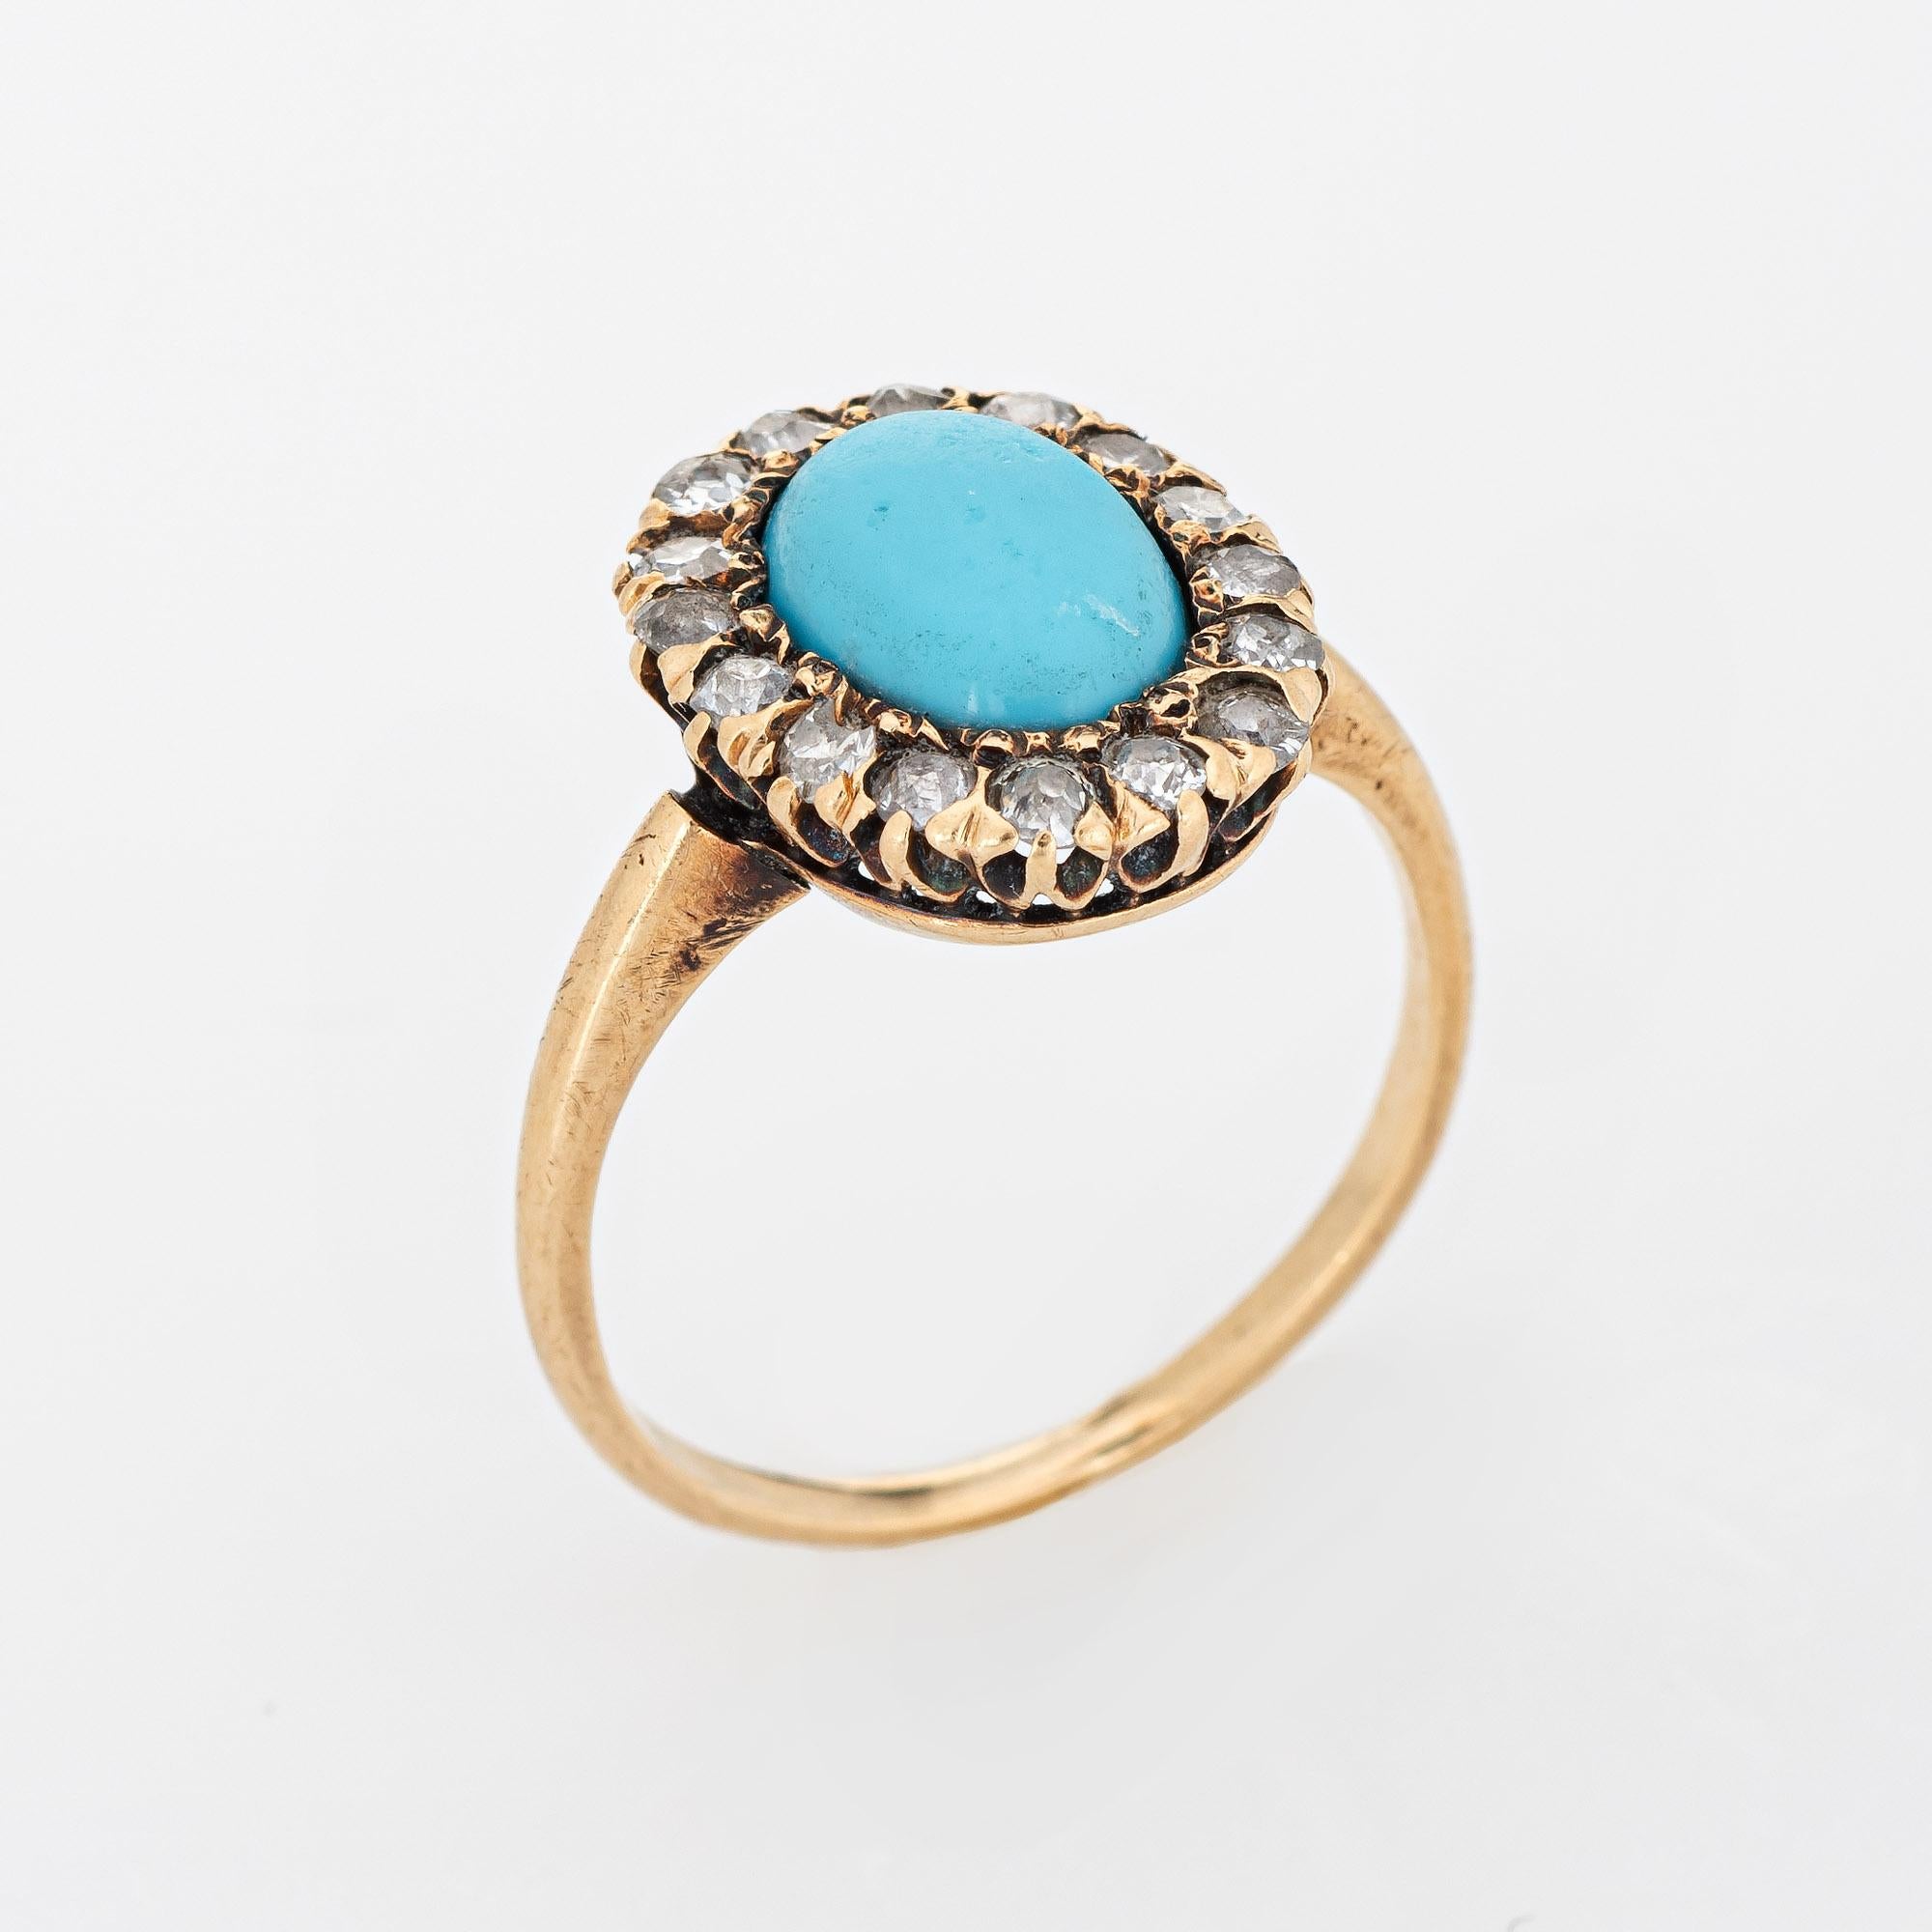 Finely detailed antique Victorian era cluster ring (circa 1880s to 1900s) crafted in 14k yellow gold.

Turquoise cabochon measures 9mm x 7mm, accented with 16 estimated 0.04 carat old mine & single cut diamonds. The total diamond weight is estimated